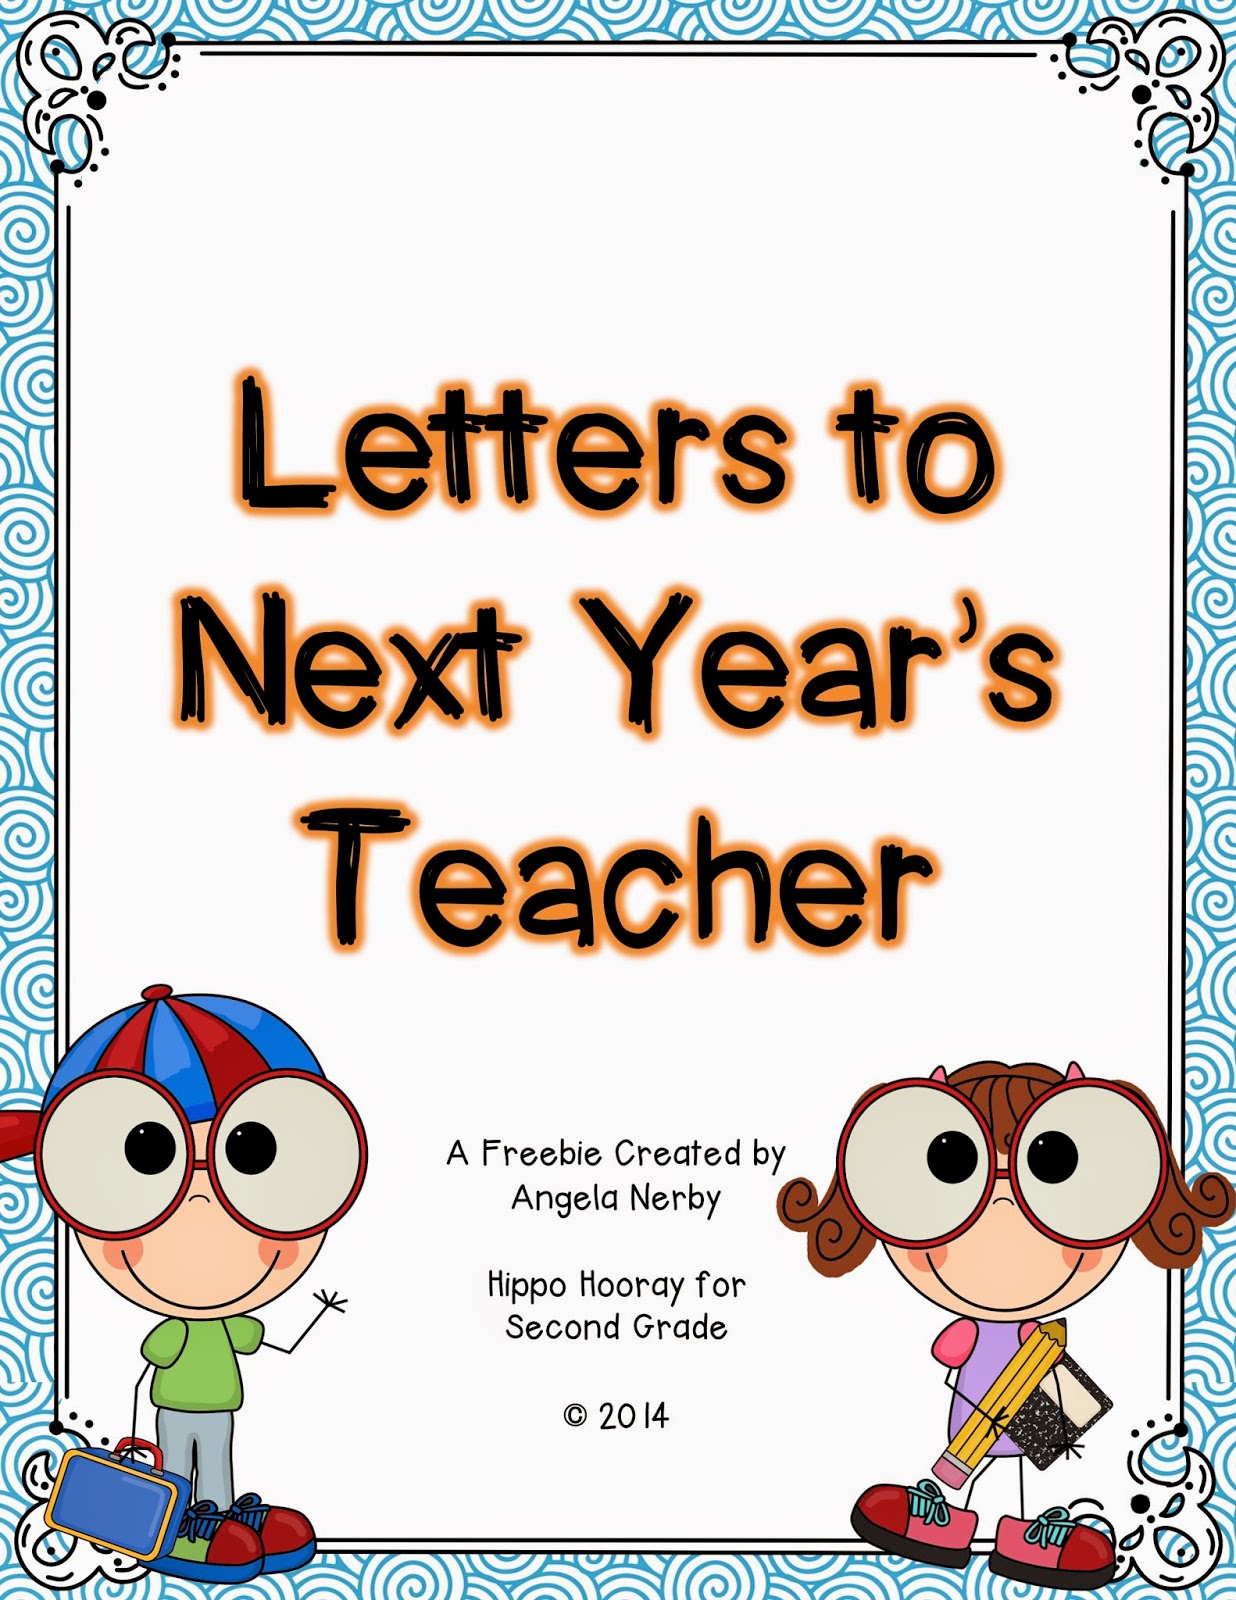 KEEP CALM! Letters to Next Year's Teacher - Hippo Hooray for Second Grade!1236 x 1600